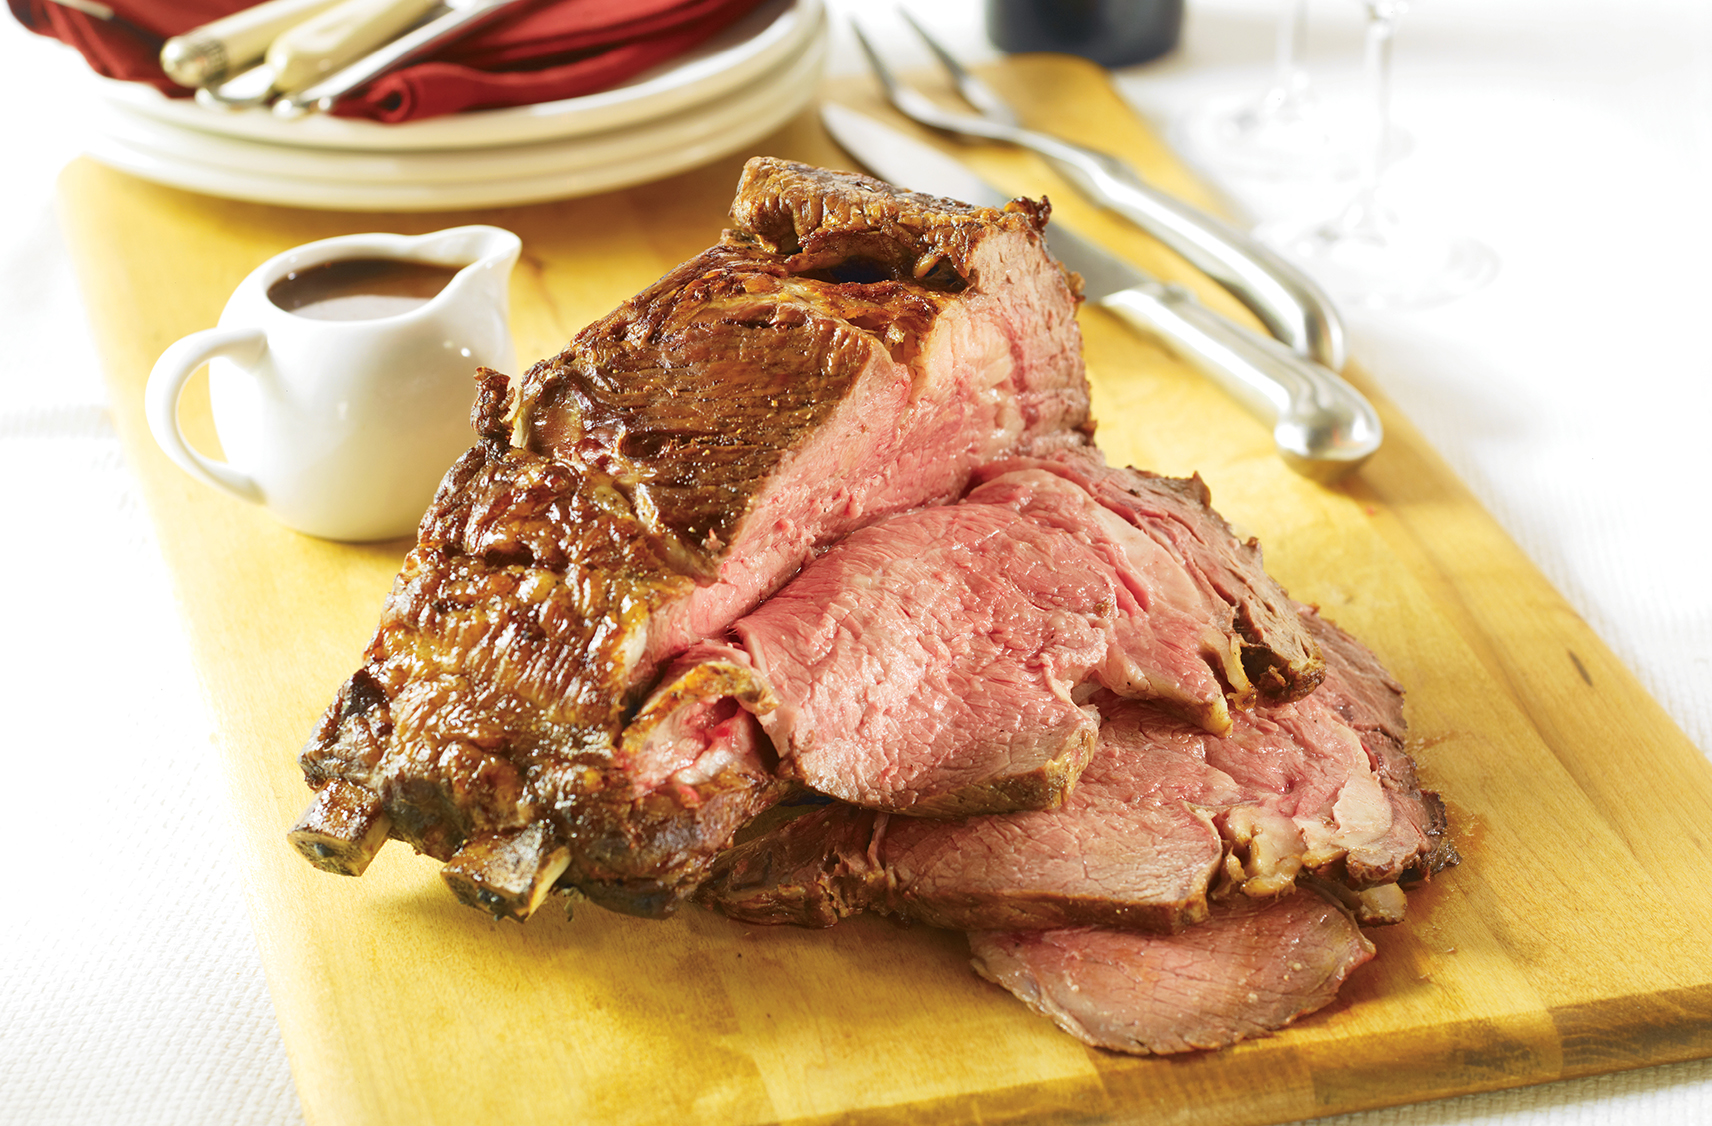 roast beef sliced up and placed on wooden cutting board for serving.  pan gravy placed in a small pouring dish on the side